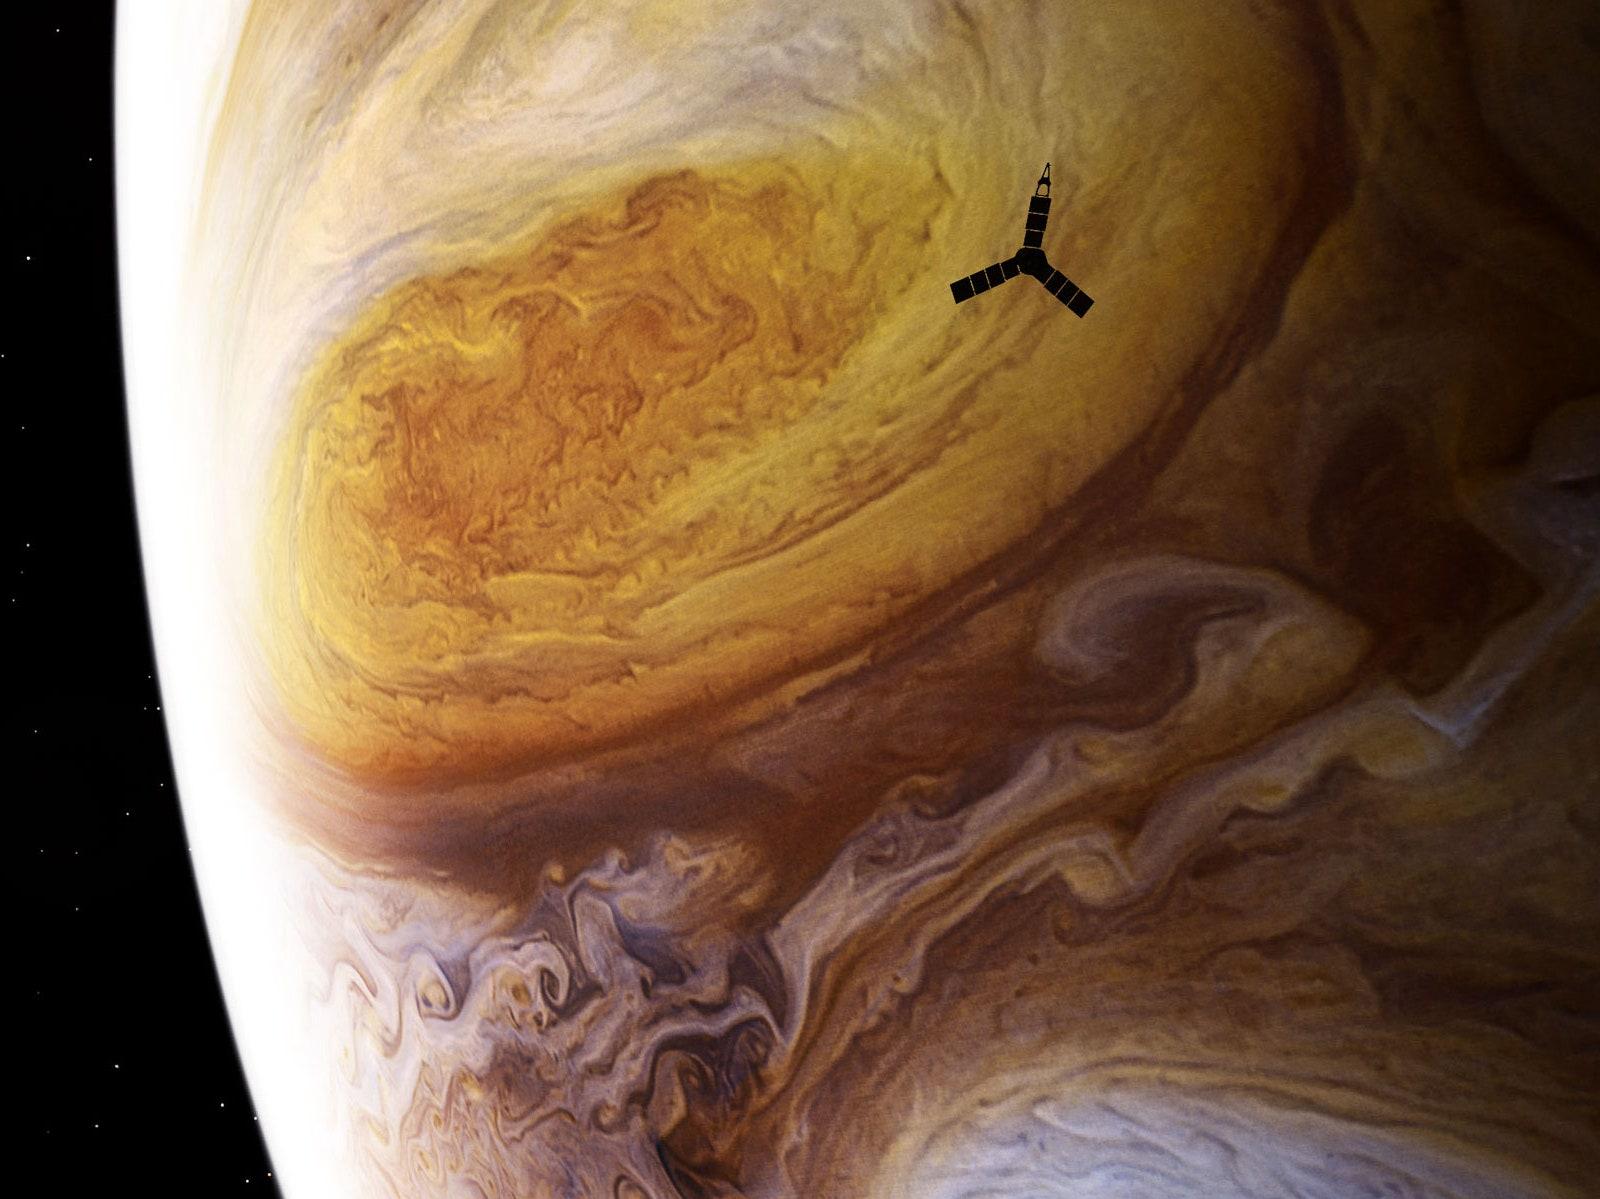 Jupiter S Great Red Spot Finally Gets Its Closeup Thanks To